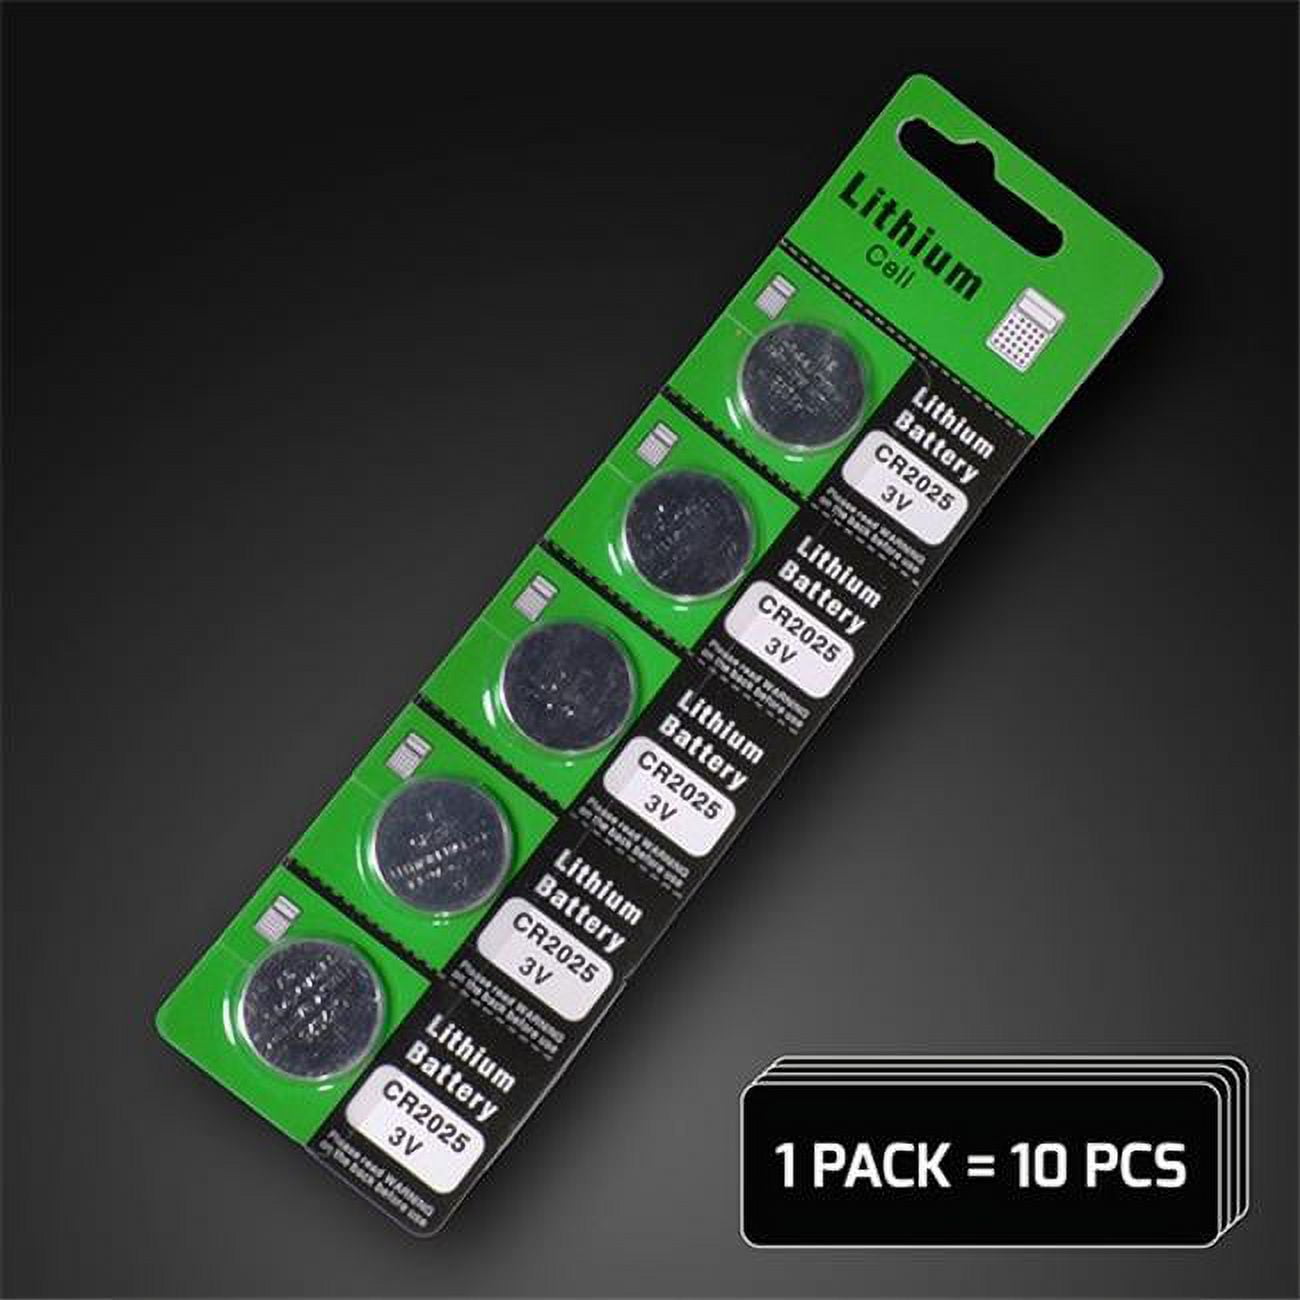 Picture of Blinkee 3941000 CR2025 Lithium Cell Batteries